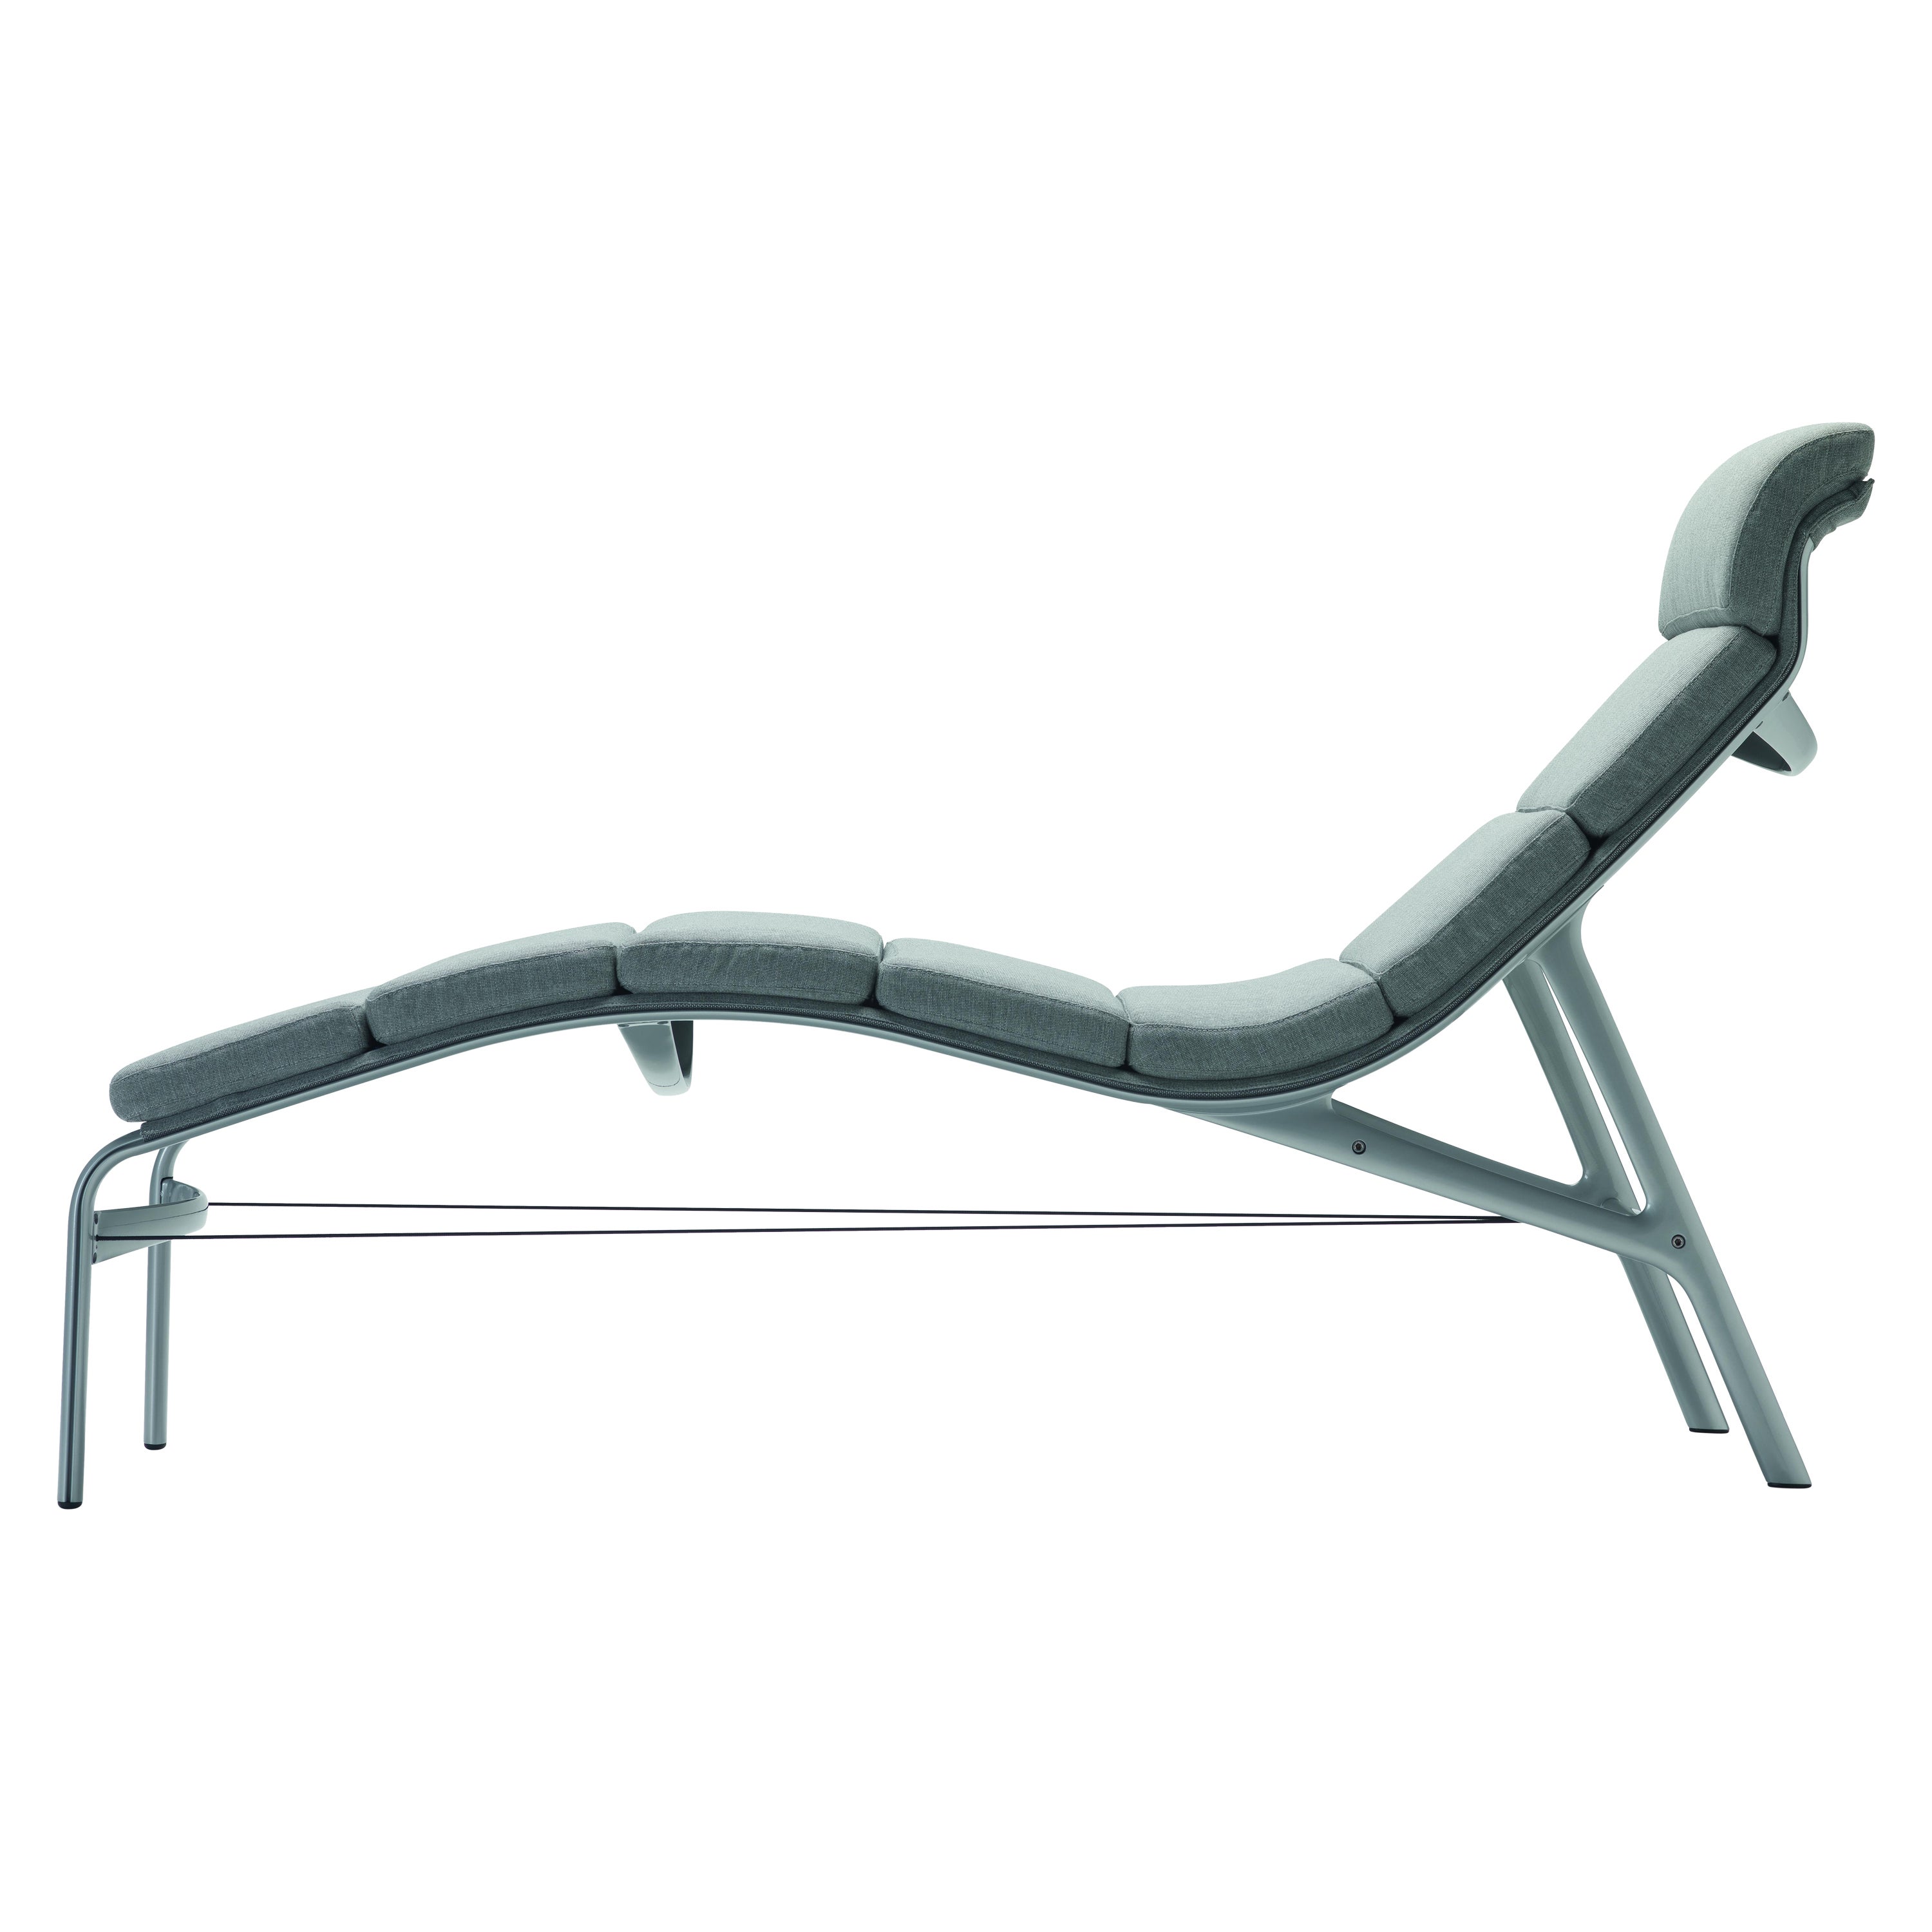 Alias 414 Longframe Soft Outdoor Chair in Grey Fabric & Lacquered Aluminum Frame